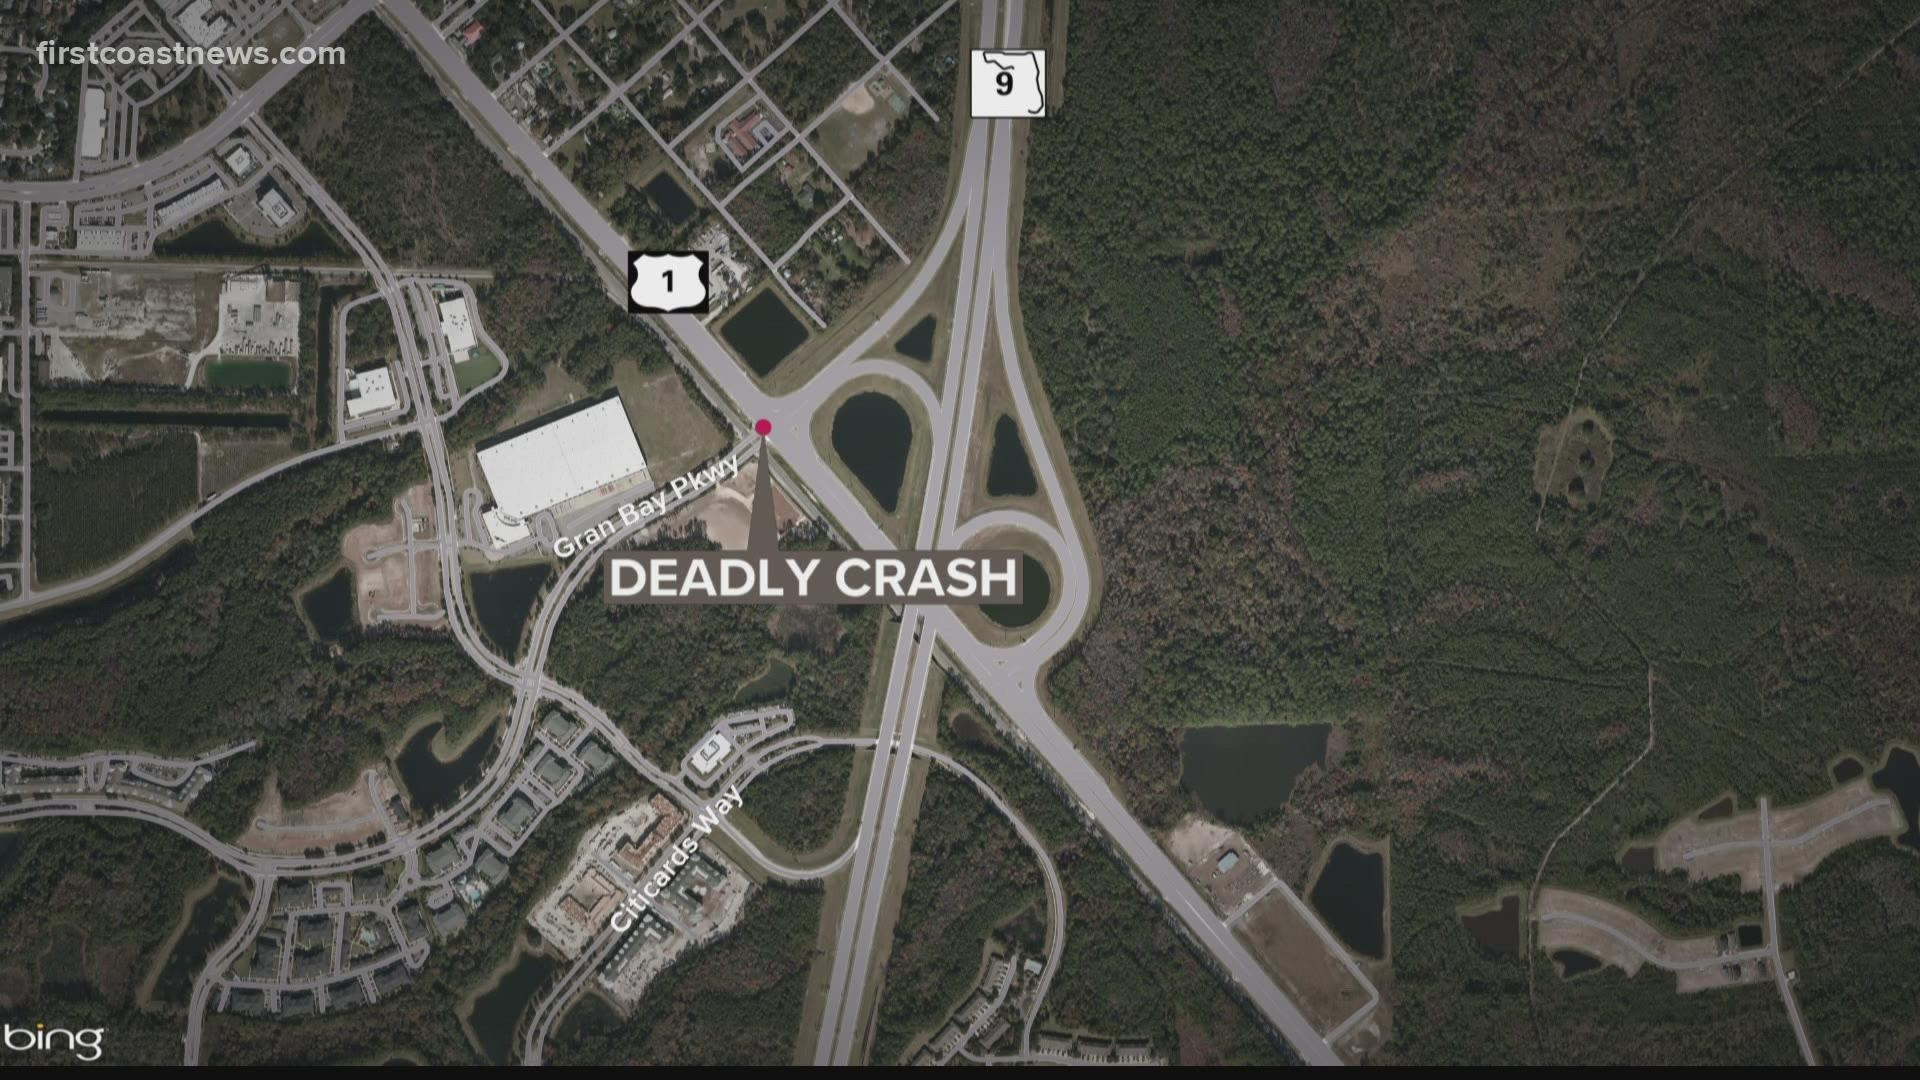 The crash happened at about 2:30 a.m. at the intersection of US 1 and Gran Bay Parkway.